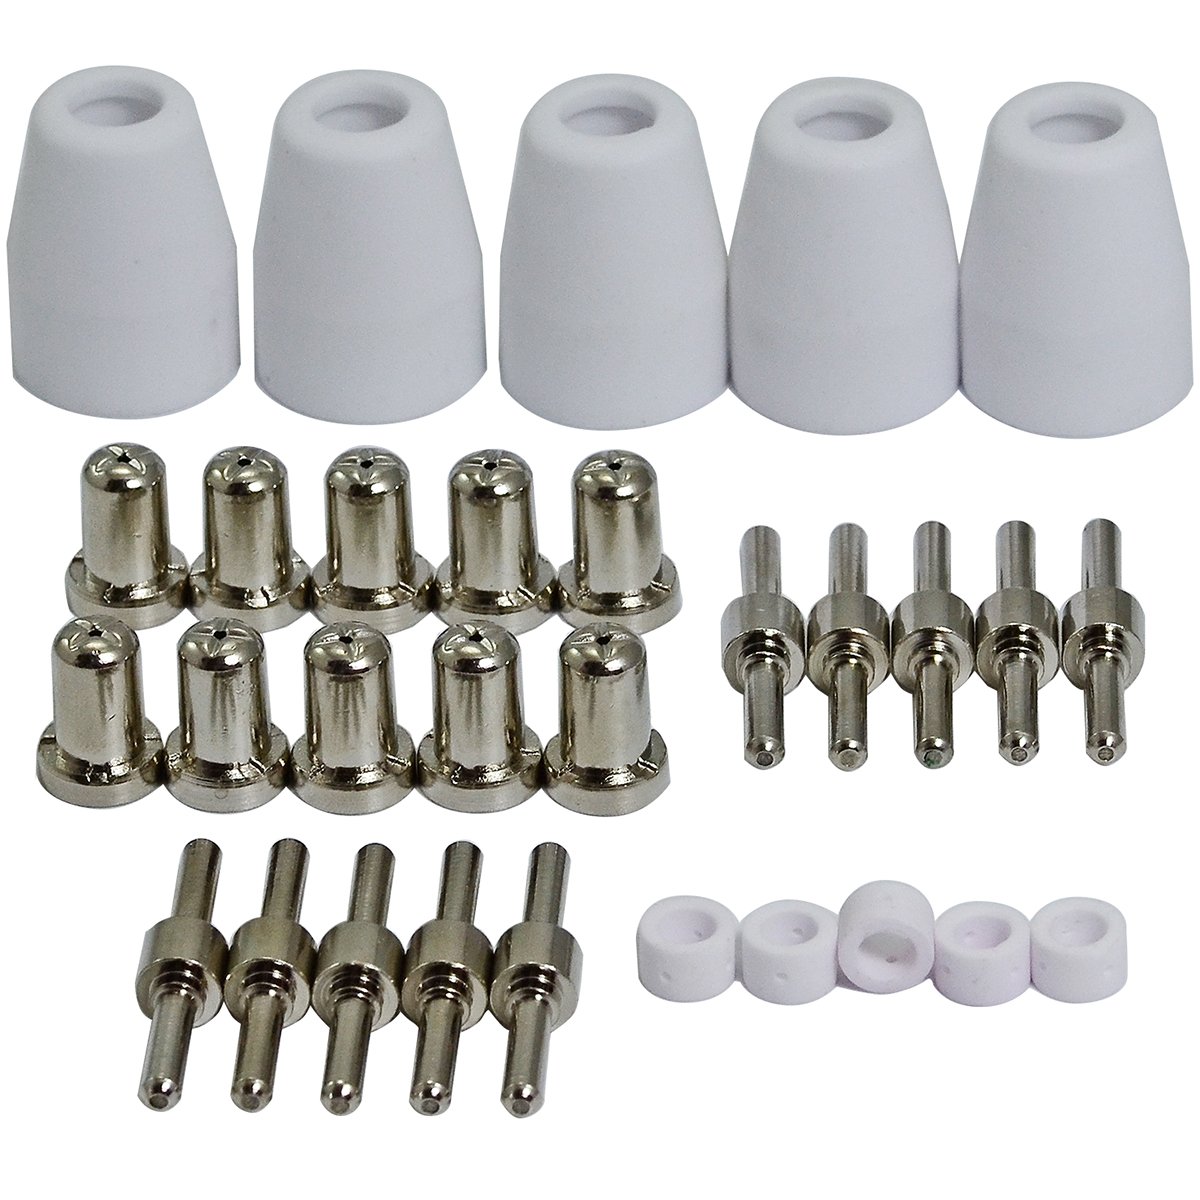 RIVERWELD PT-31 Plasma Electrode Nozzle Tip Kit Extended Nickel-plated Fit CUT 30 40 40D 50 CT312 Plasma Cutter Torch 30pcs